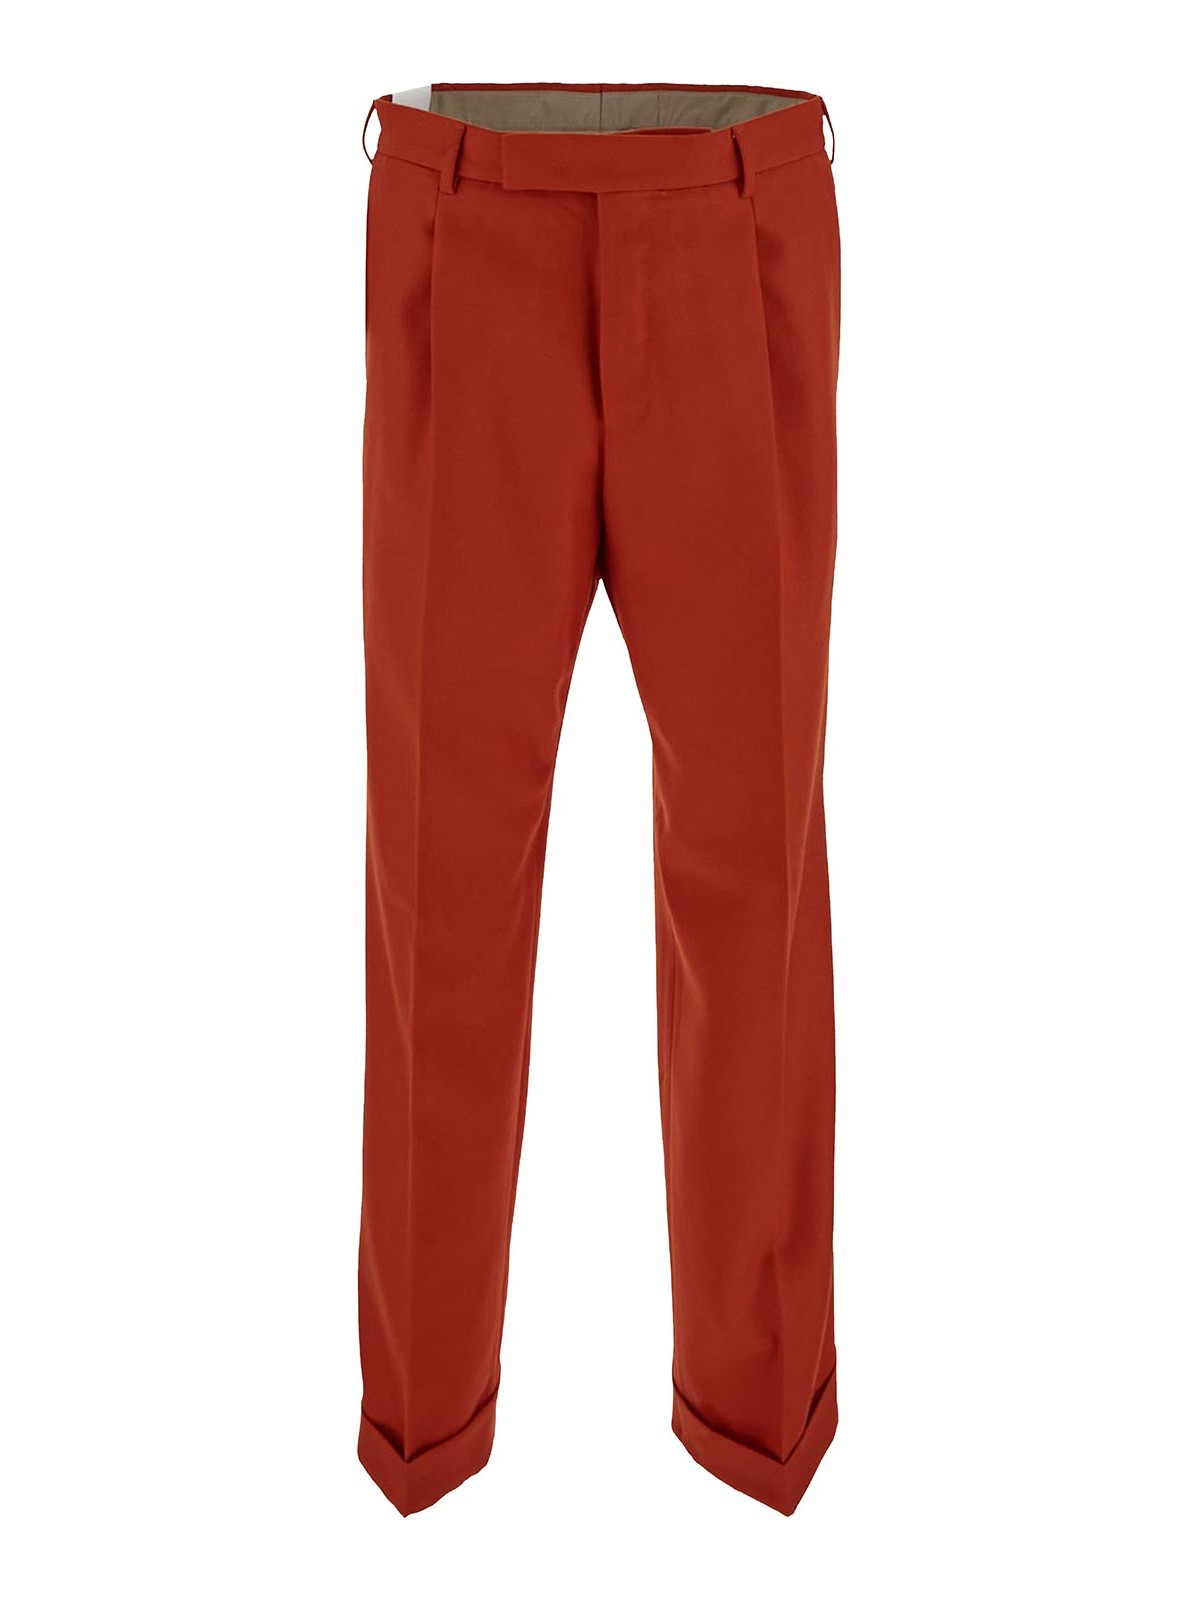 Pt Torino Red Trousers With Side Pockets In Orange